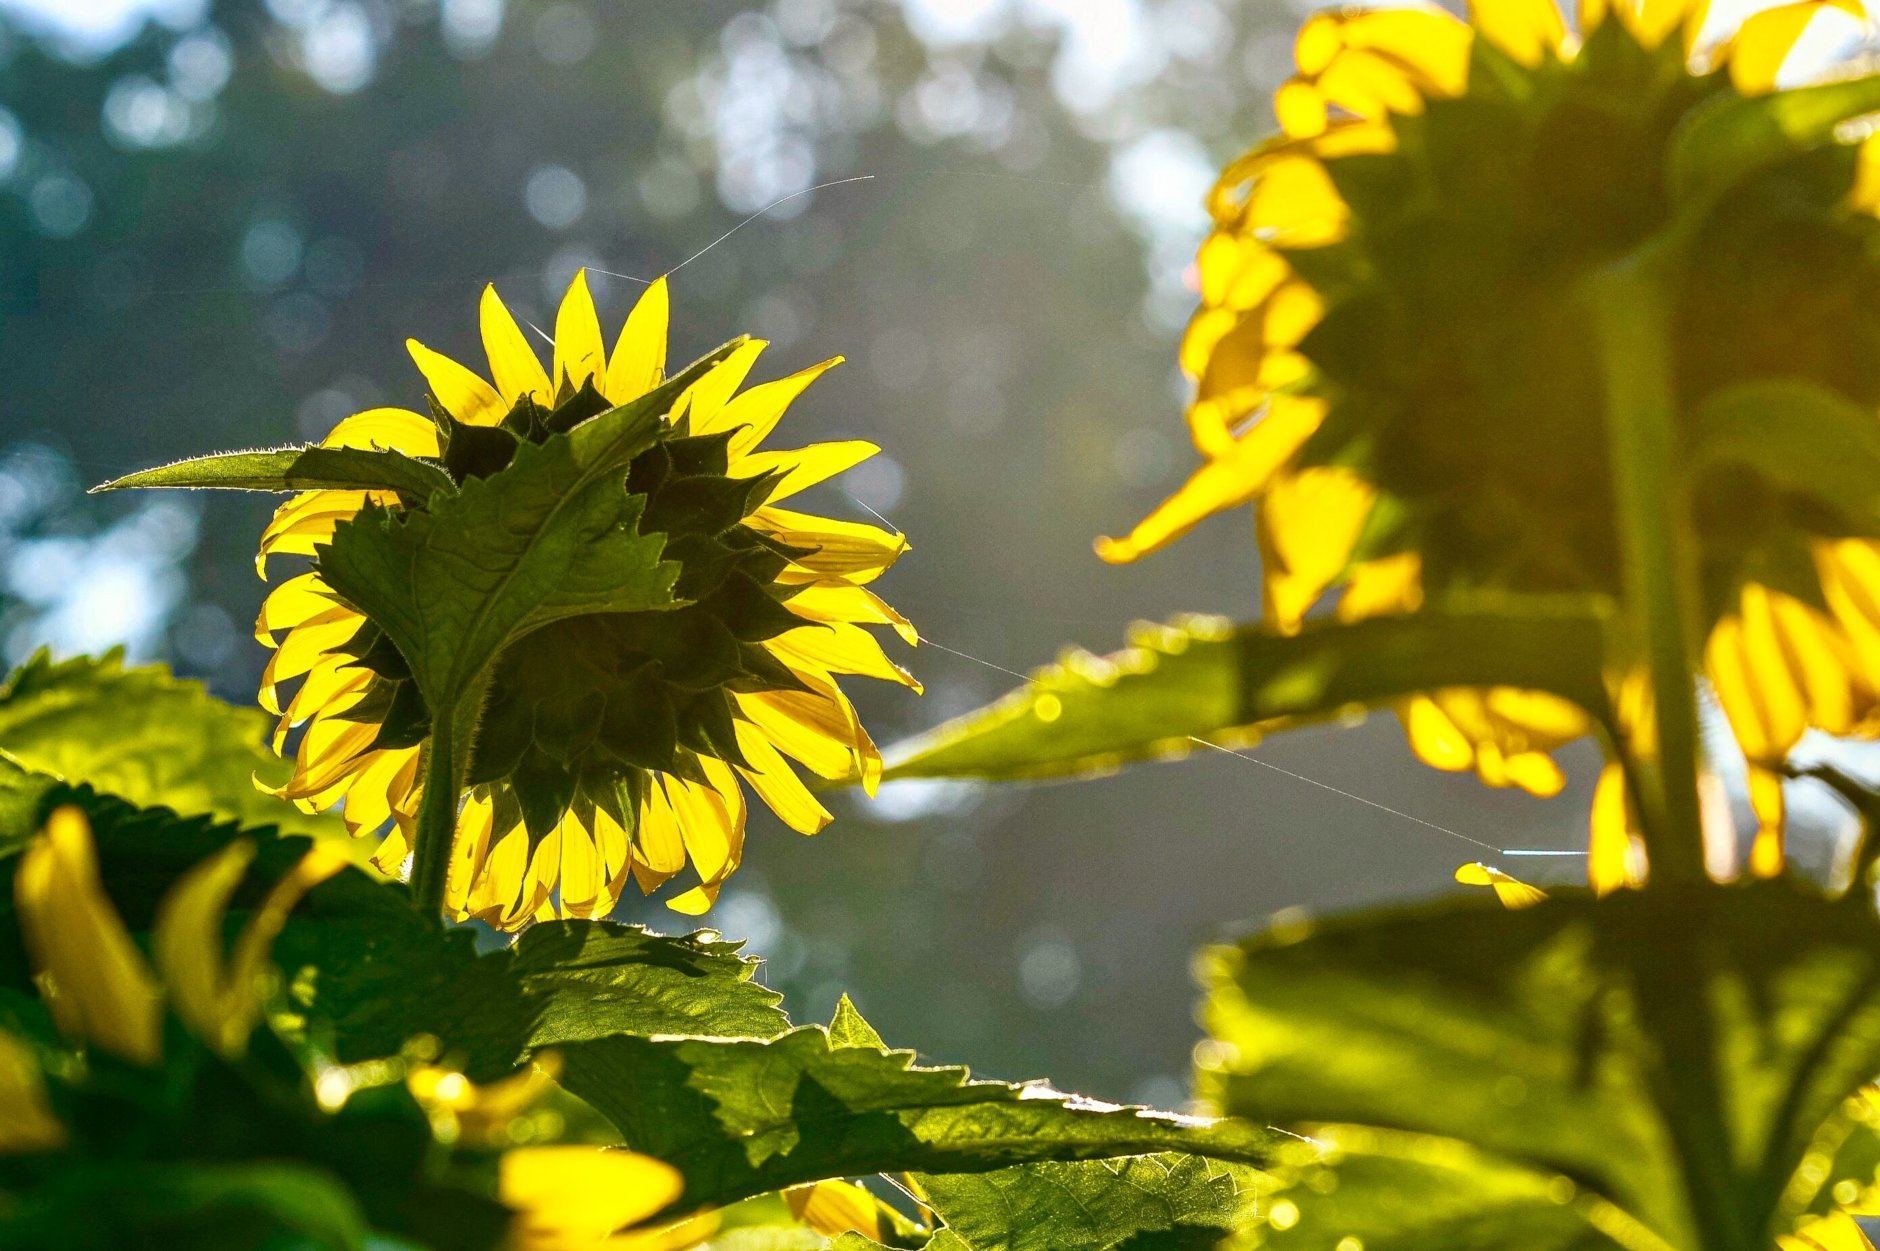 insta-ready fields: best places to see sunflowers this summer | wtop